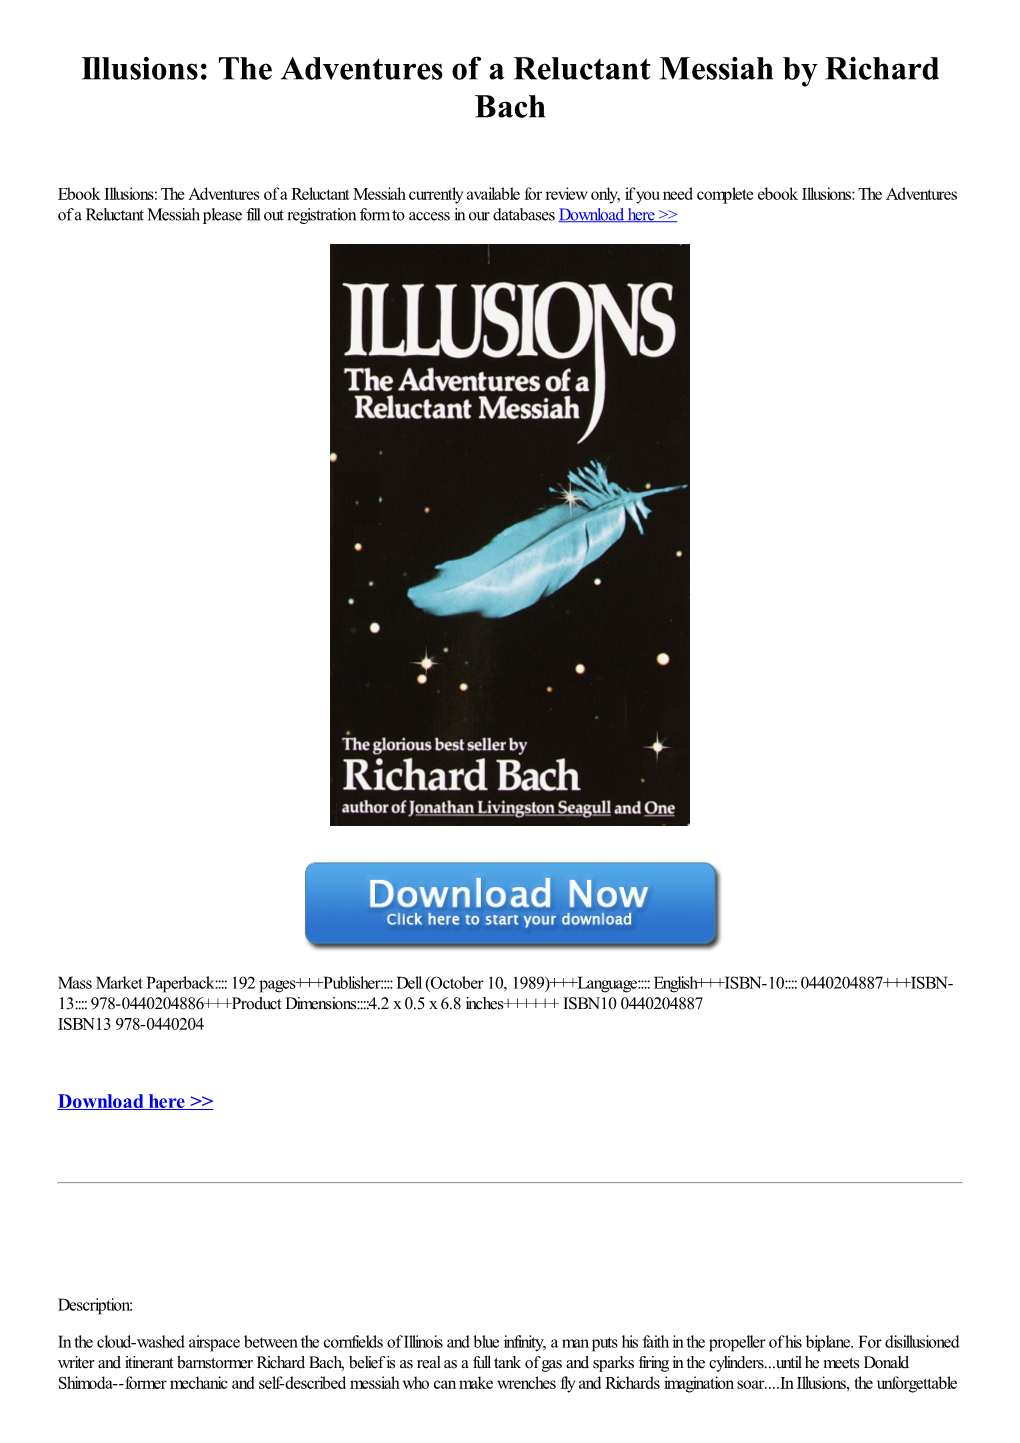 Illusions: the Adventures of a Reluctant Messiah by Richard Bach